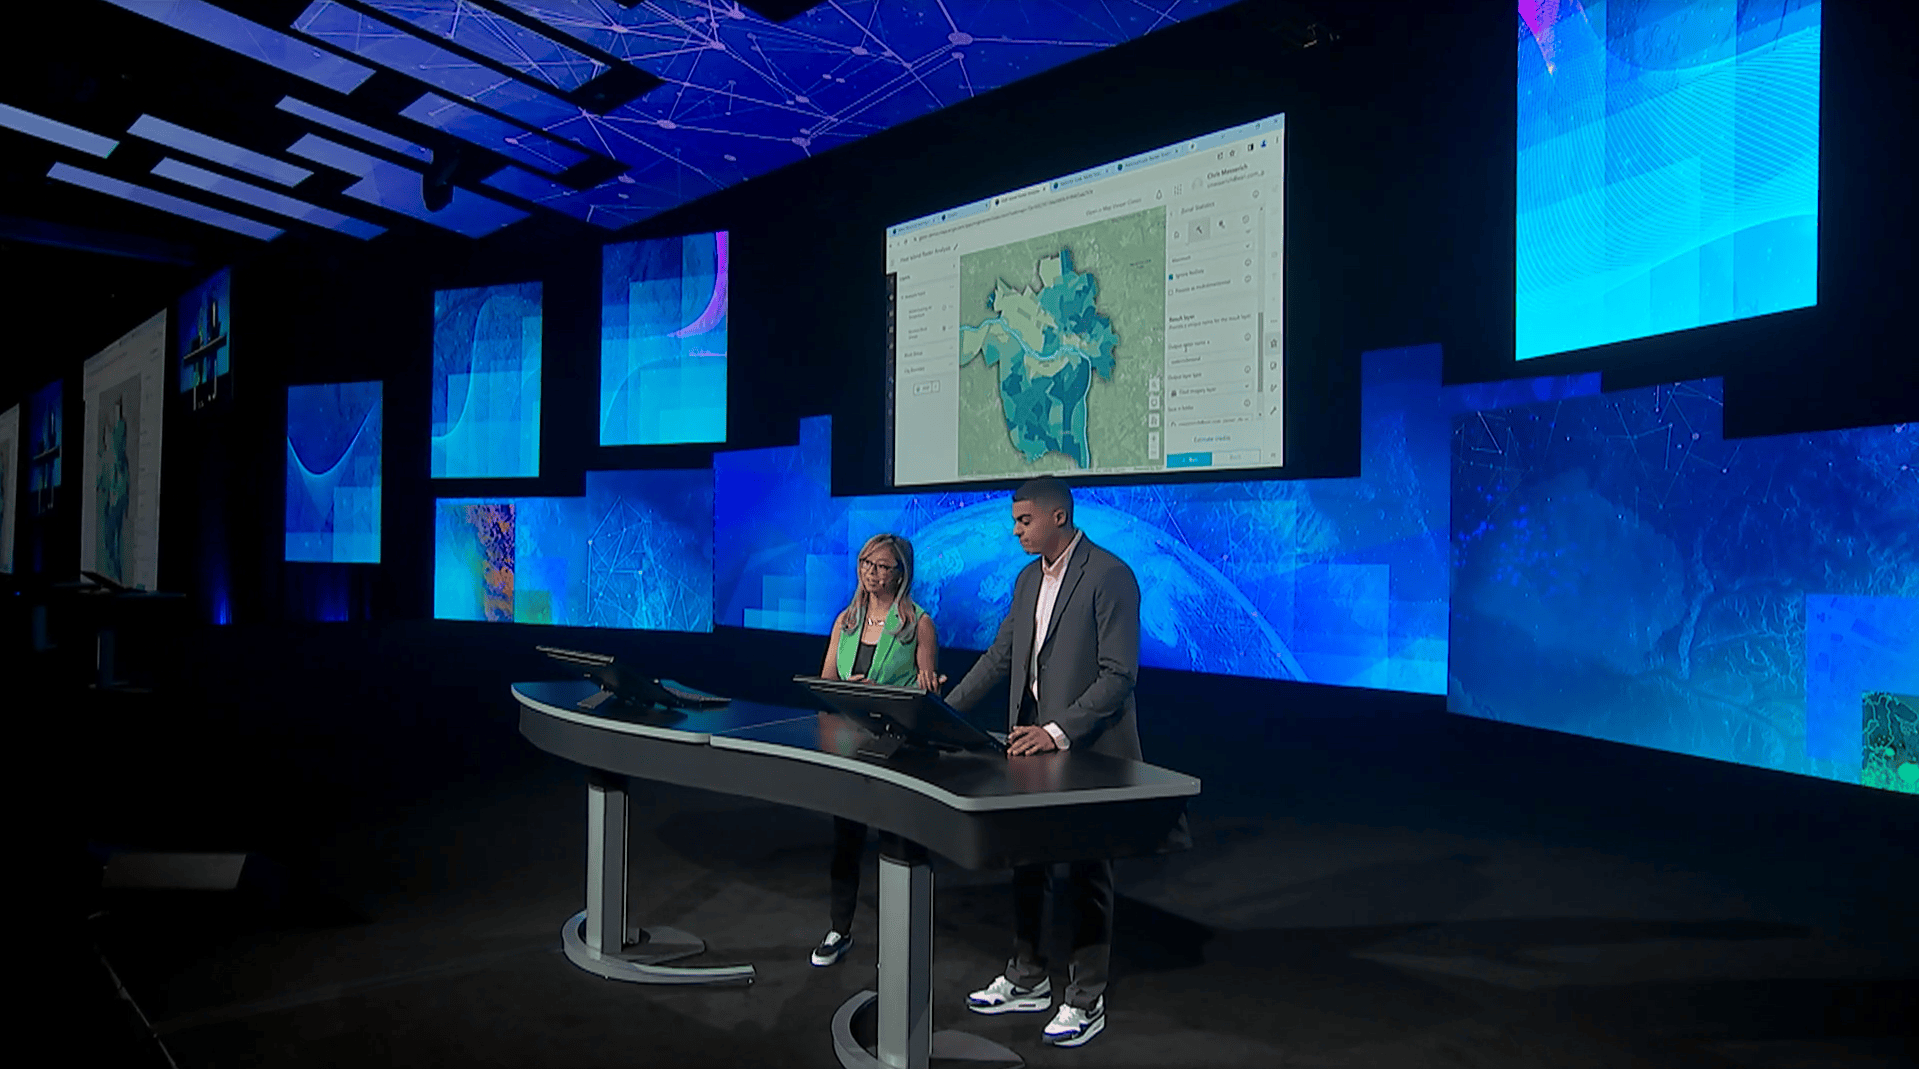 Two presenters stand on a stage in front of a screen showing a map of urban heat islands in the city of Richmond, Virginia